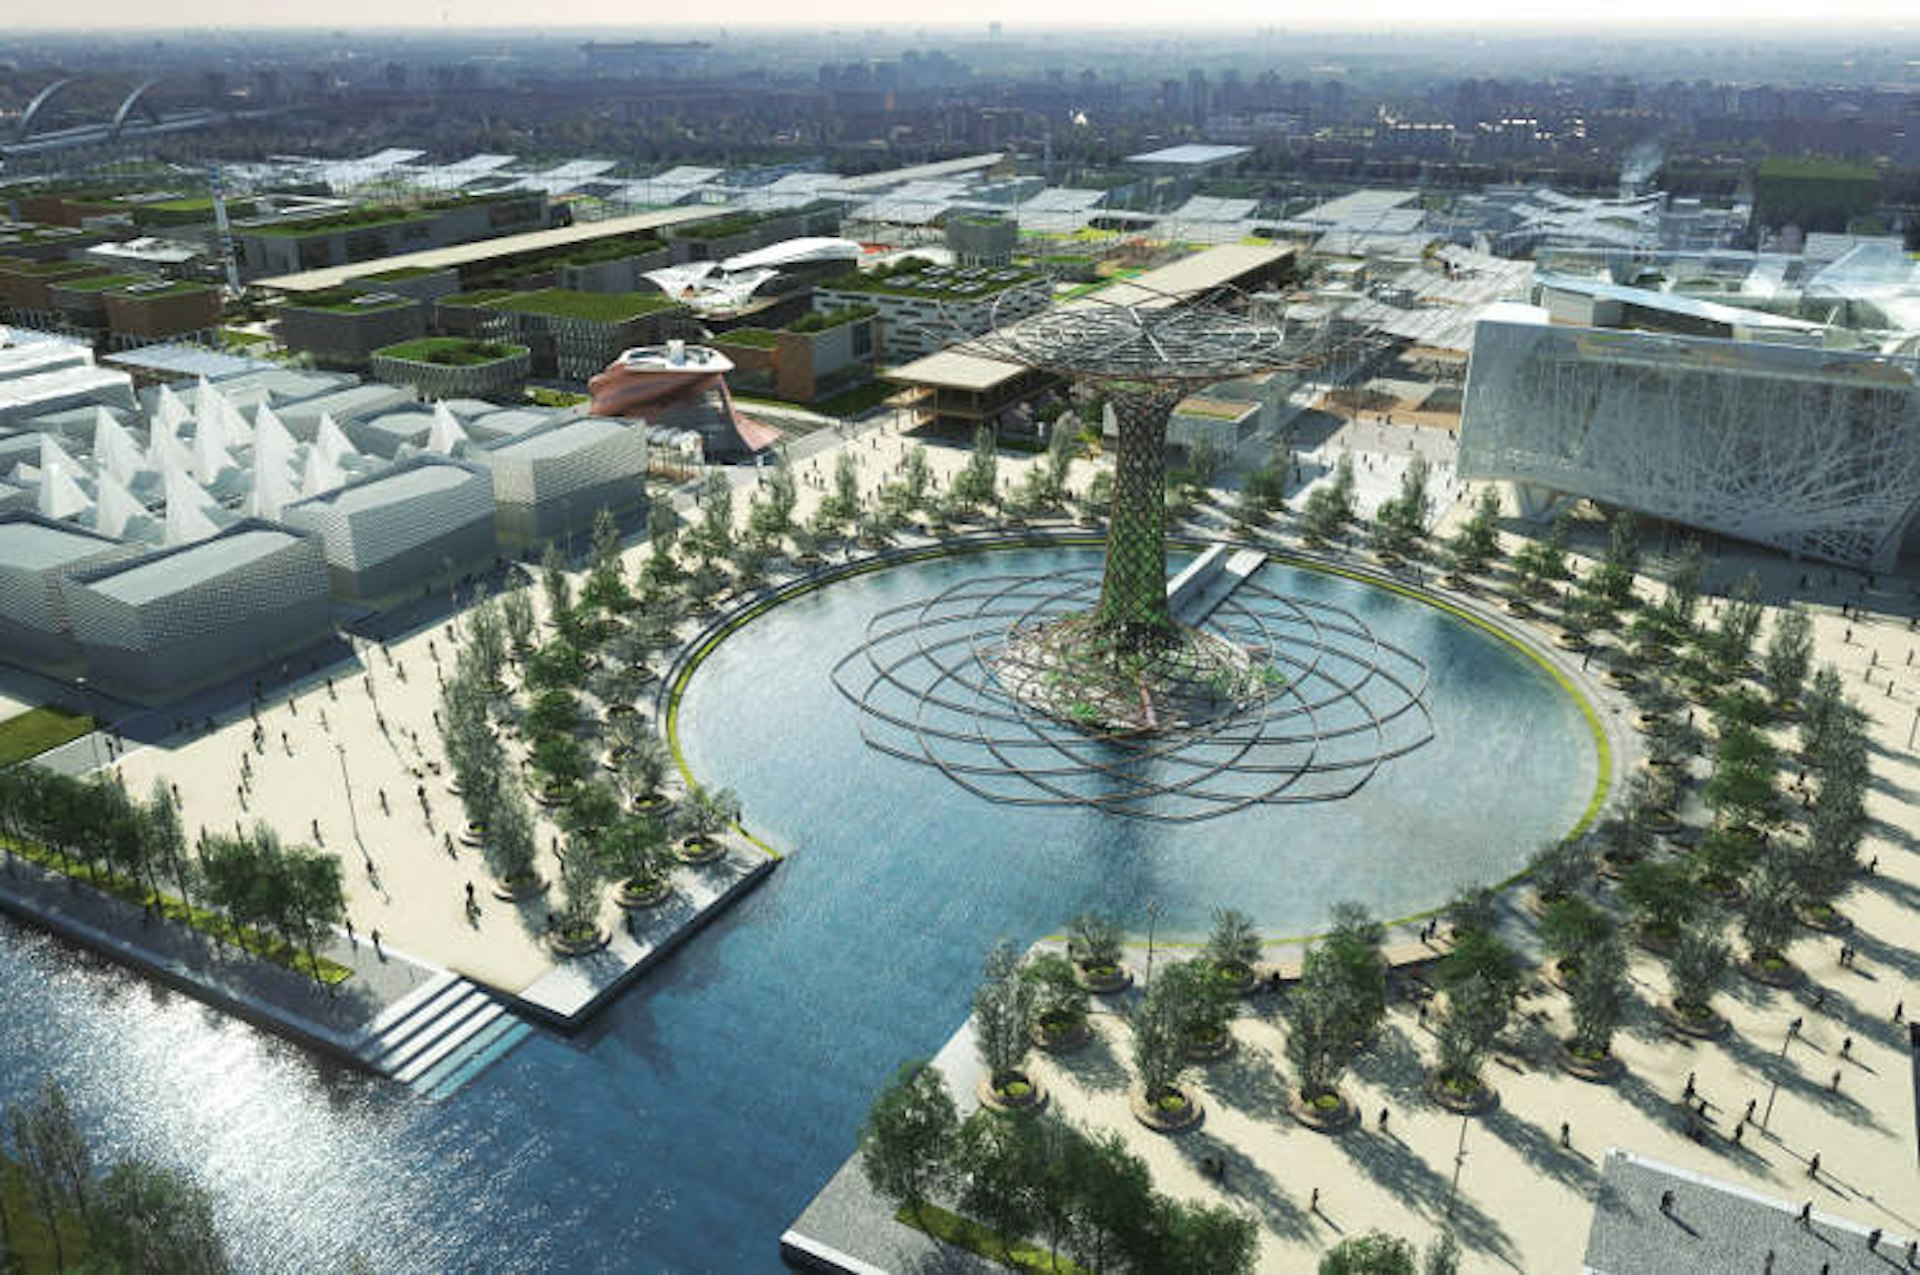 Artist's interpretation of how Expo 2015's Lake Arena will appear.